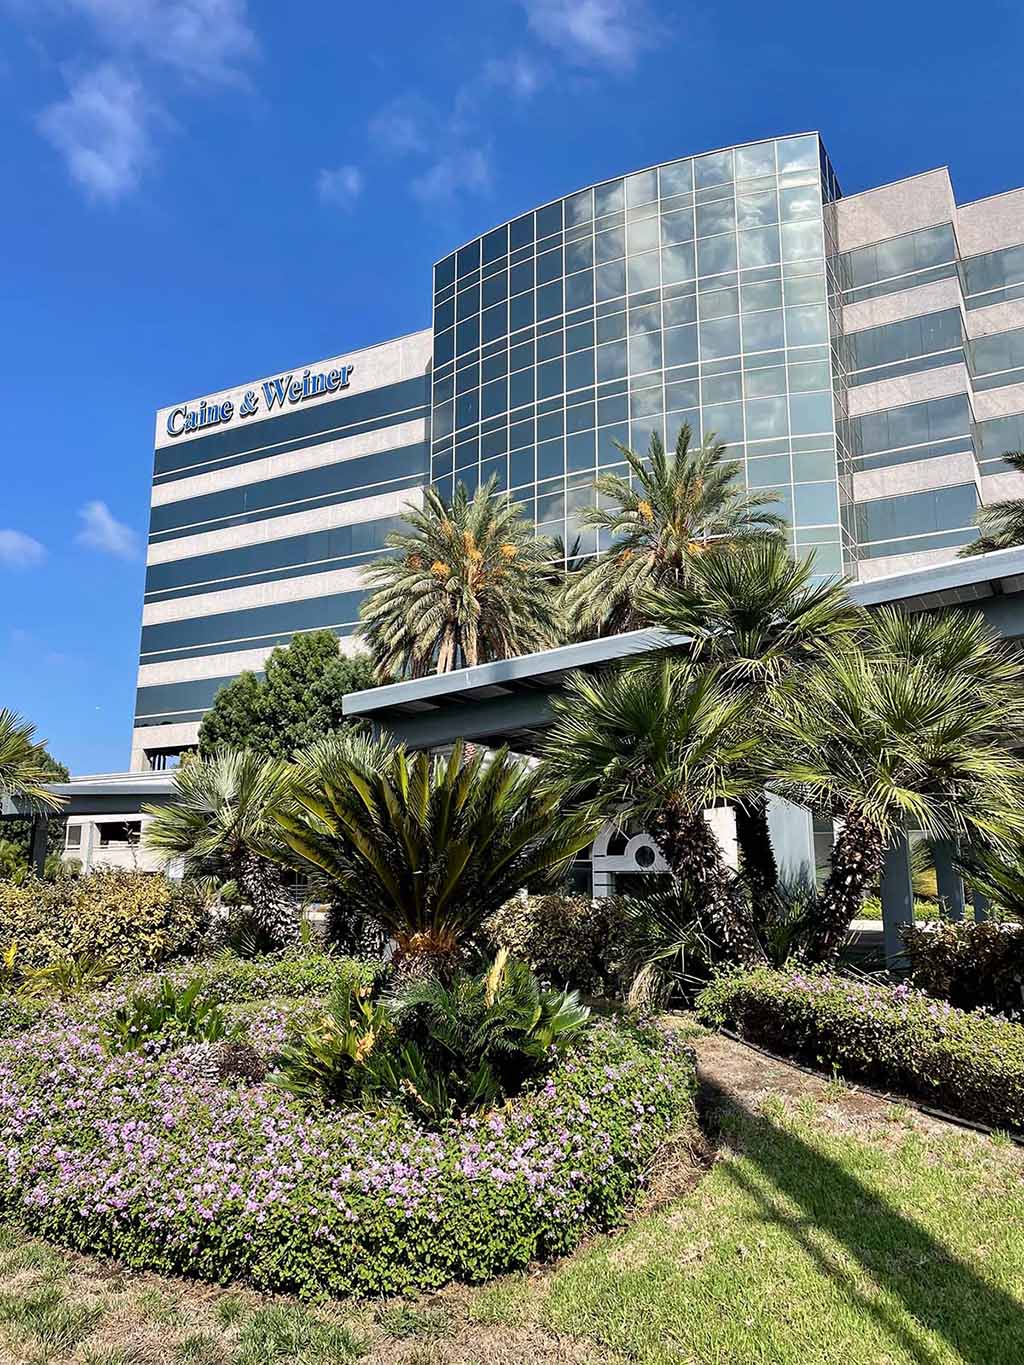 Southern California Multi-Specialty Center serves patients from Pasadena